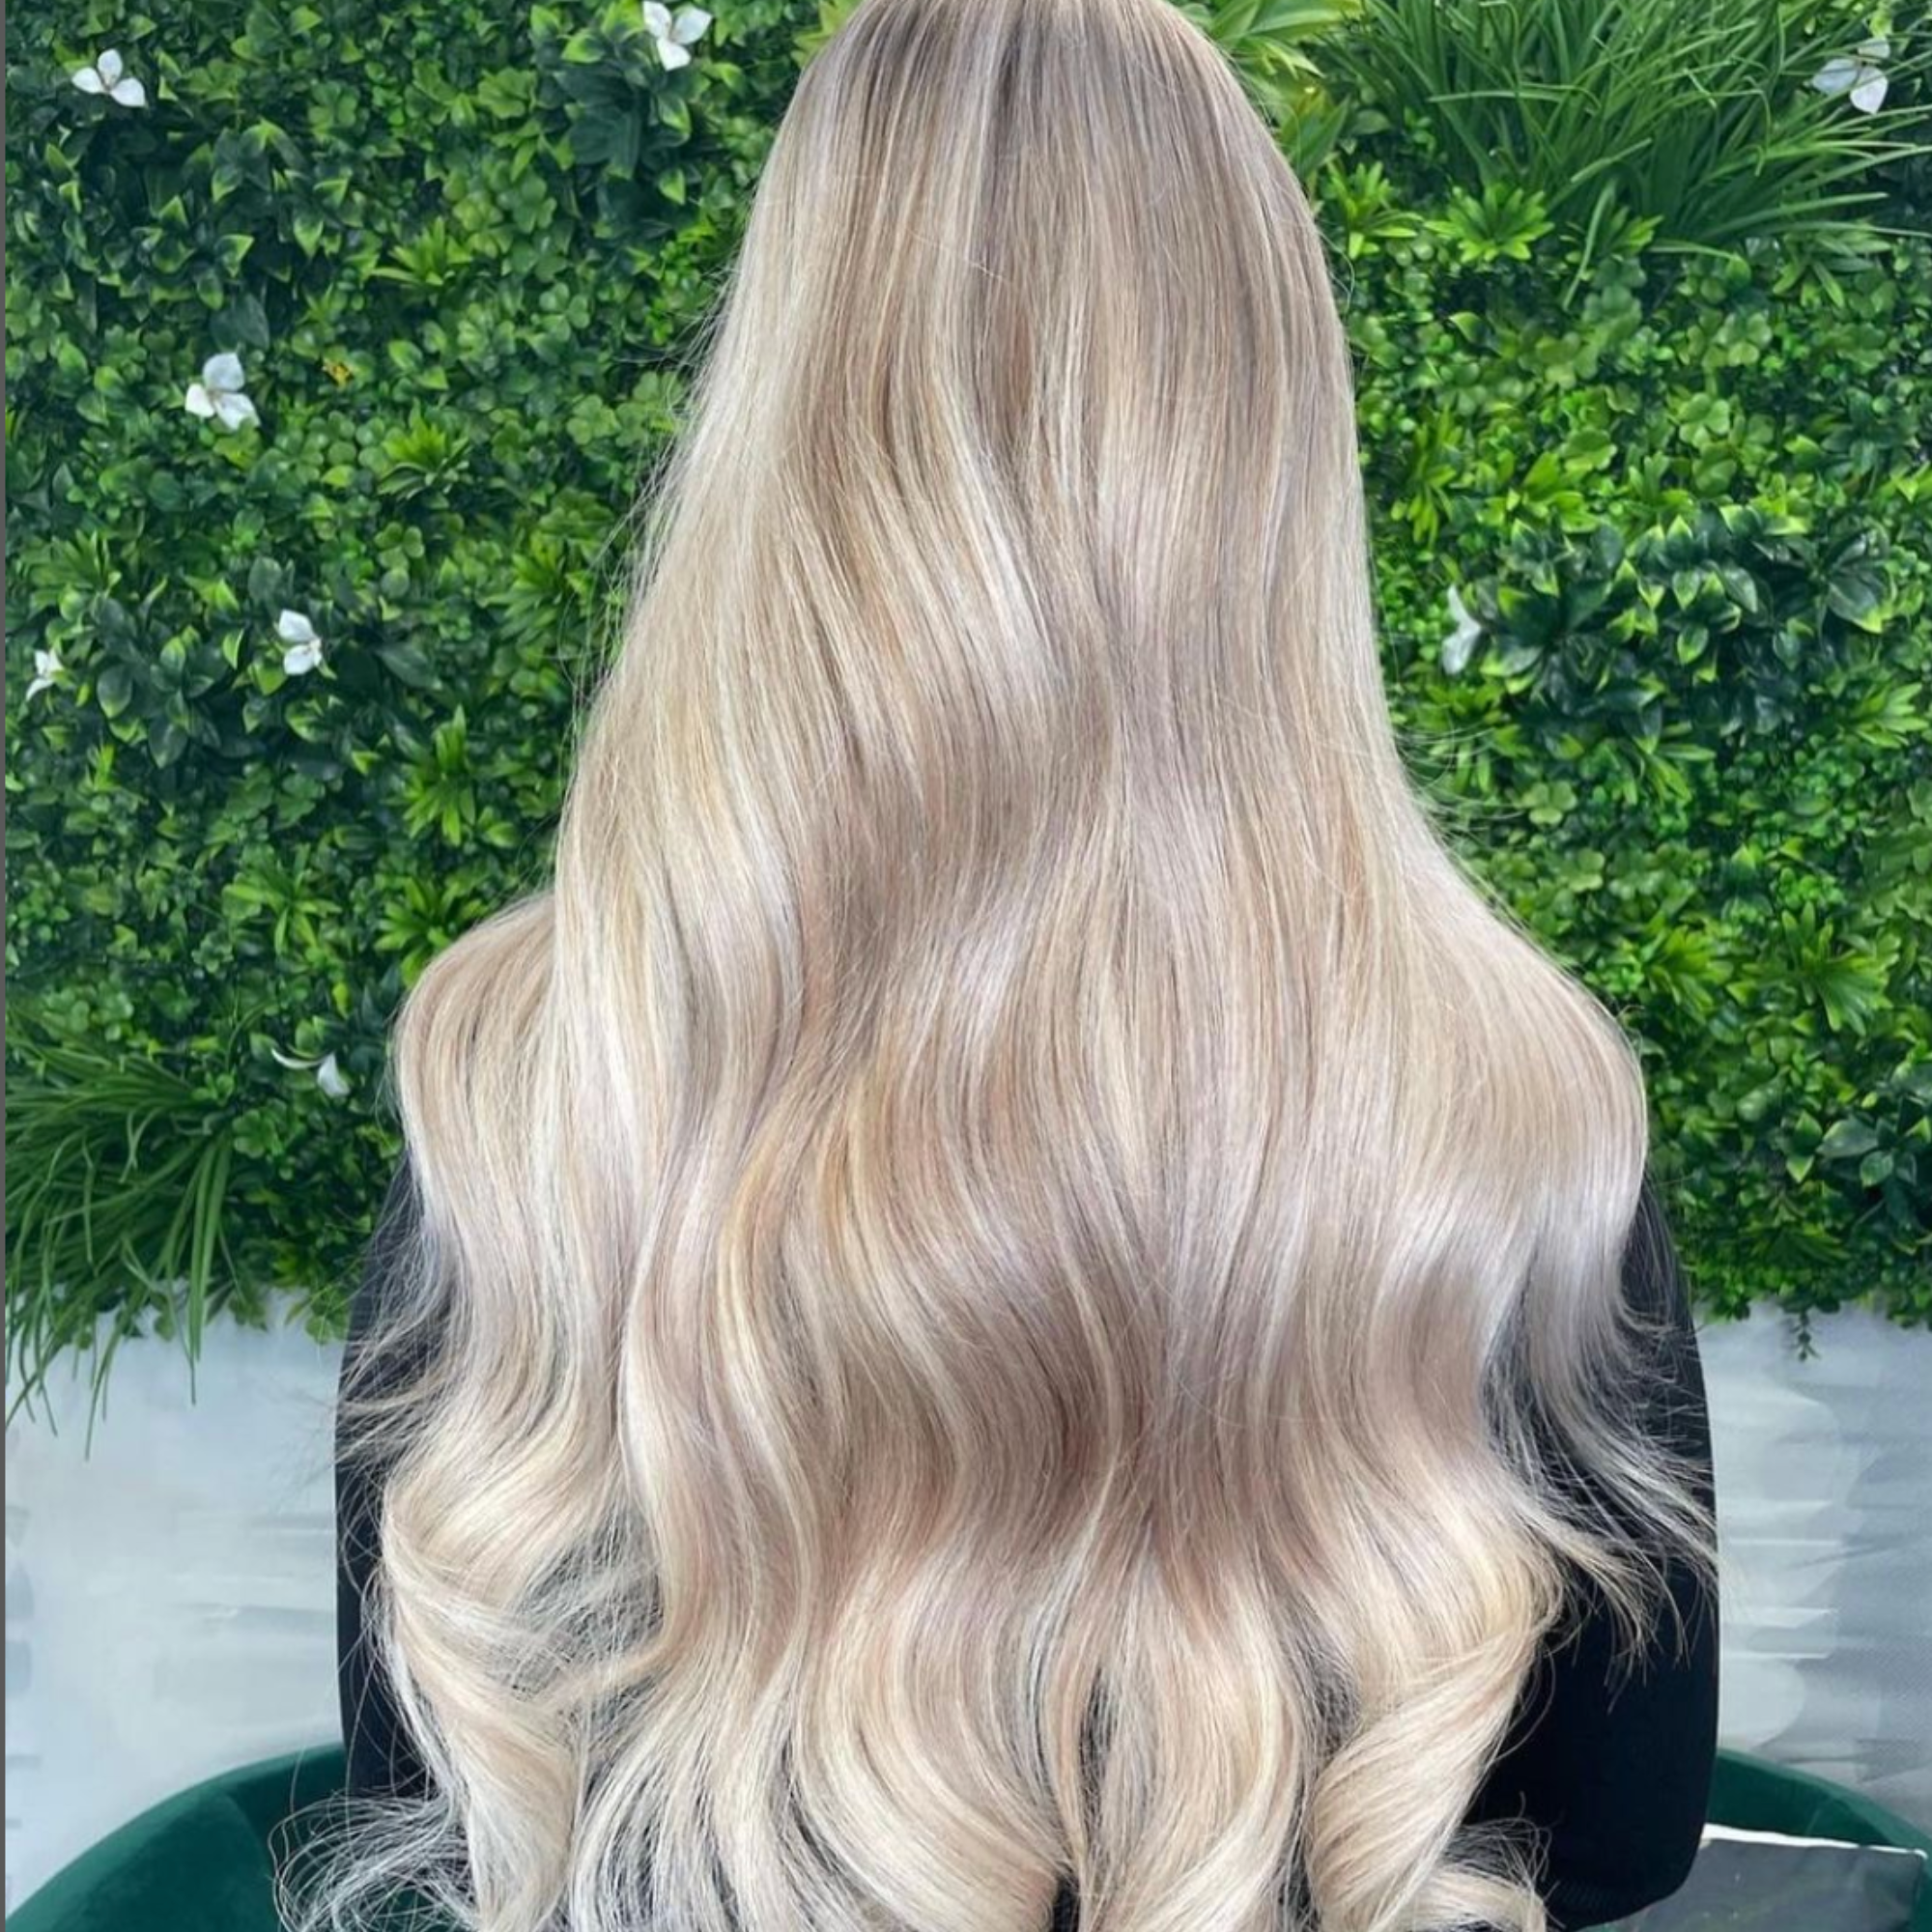 14" Invisible Tape Extensions Steel Blonde